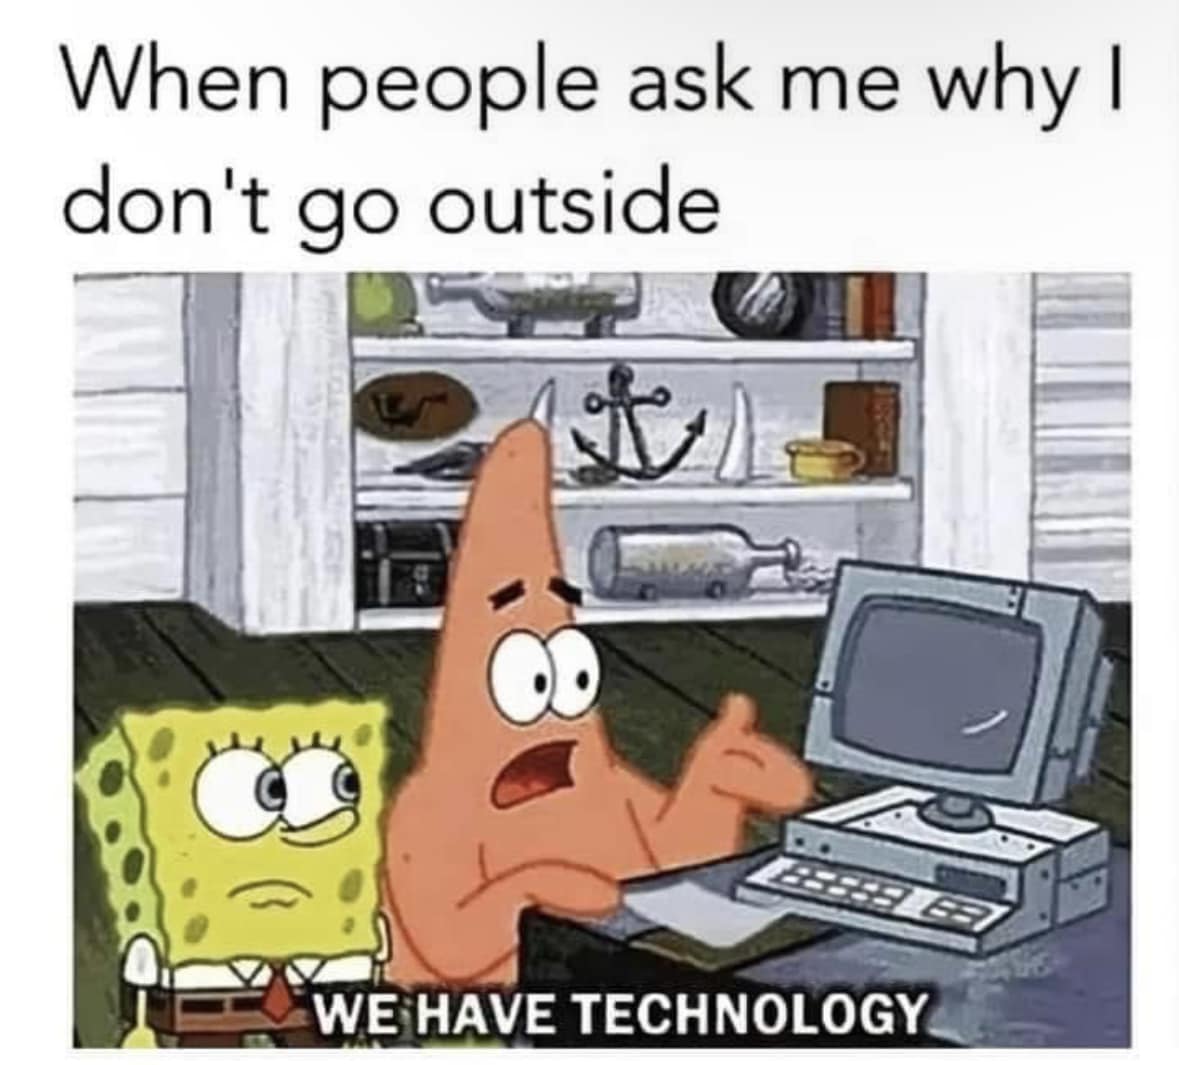 funny memes - funny tech memes - When people ask me why I don't go outside t B We Have Technology